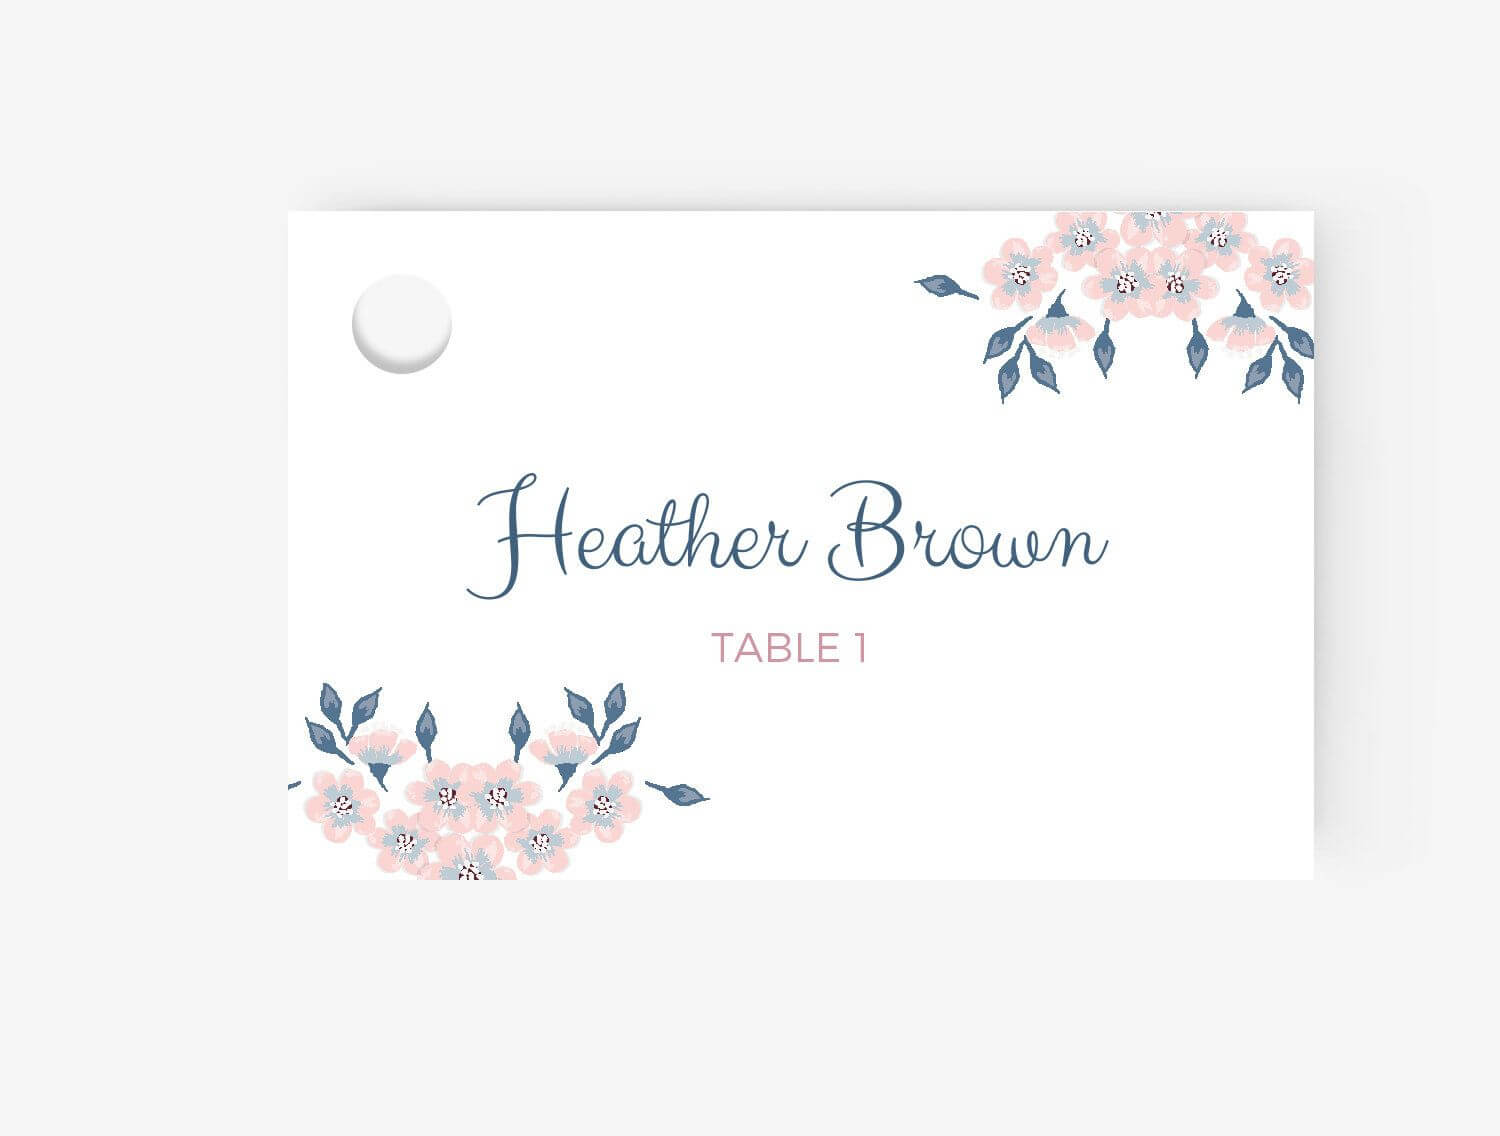 005 Free Place Card Template Ideas Cards Excellent Name Intended For Free Place Card Templates Download